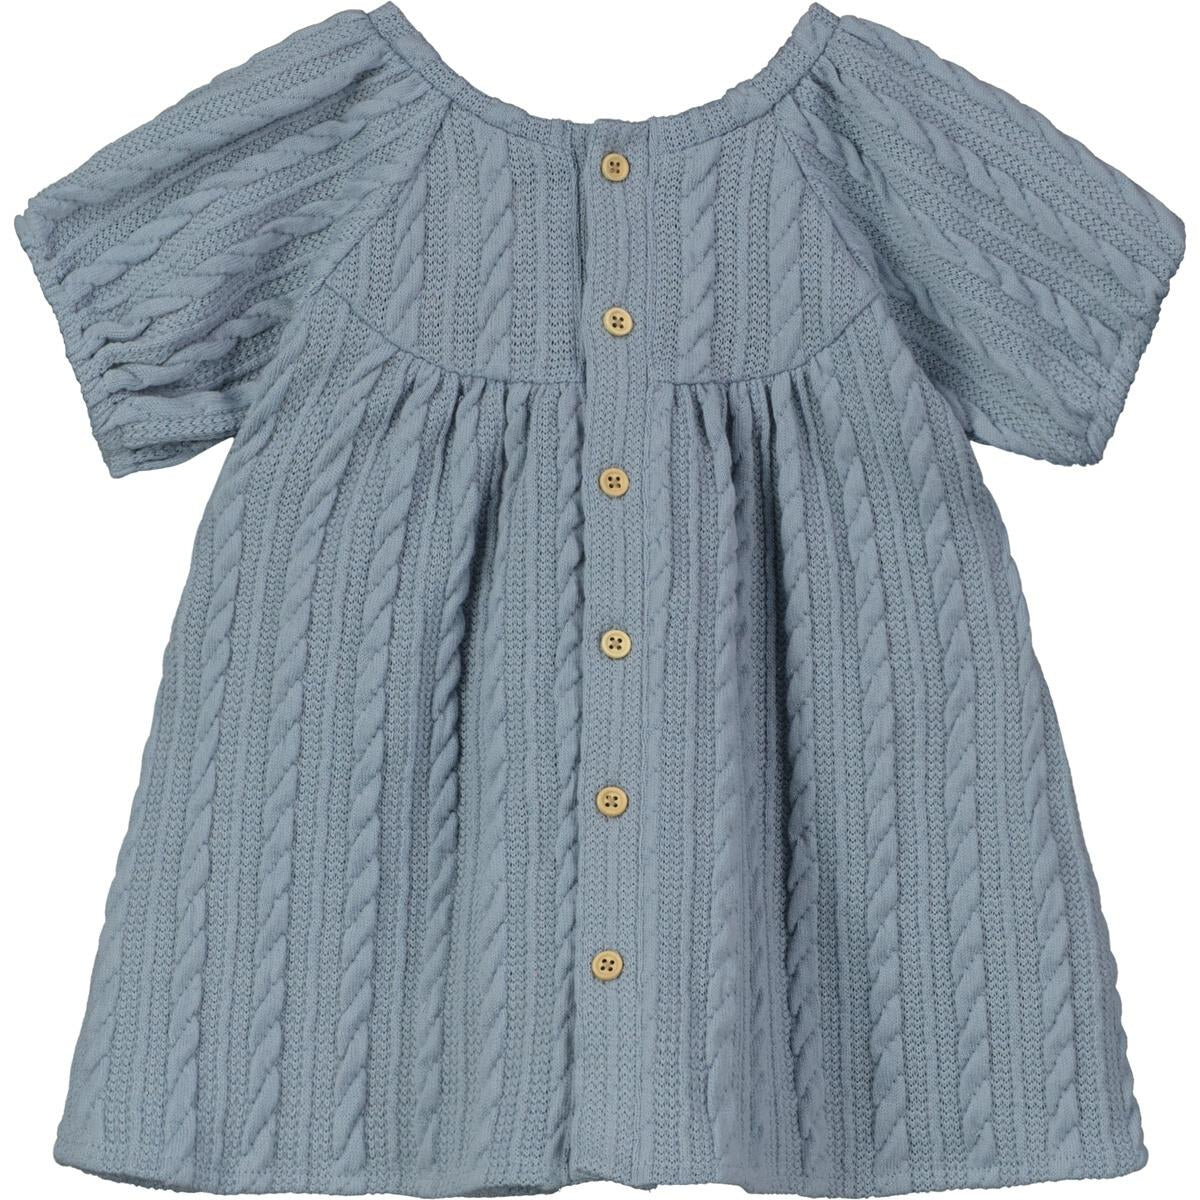 This Blue Keresen Dress is warm enough to carry through the season in style! Darling cable knit design and button-closure that can be worn in front or back.   95% polyester, 5% spandex. 